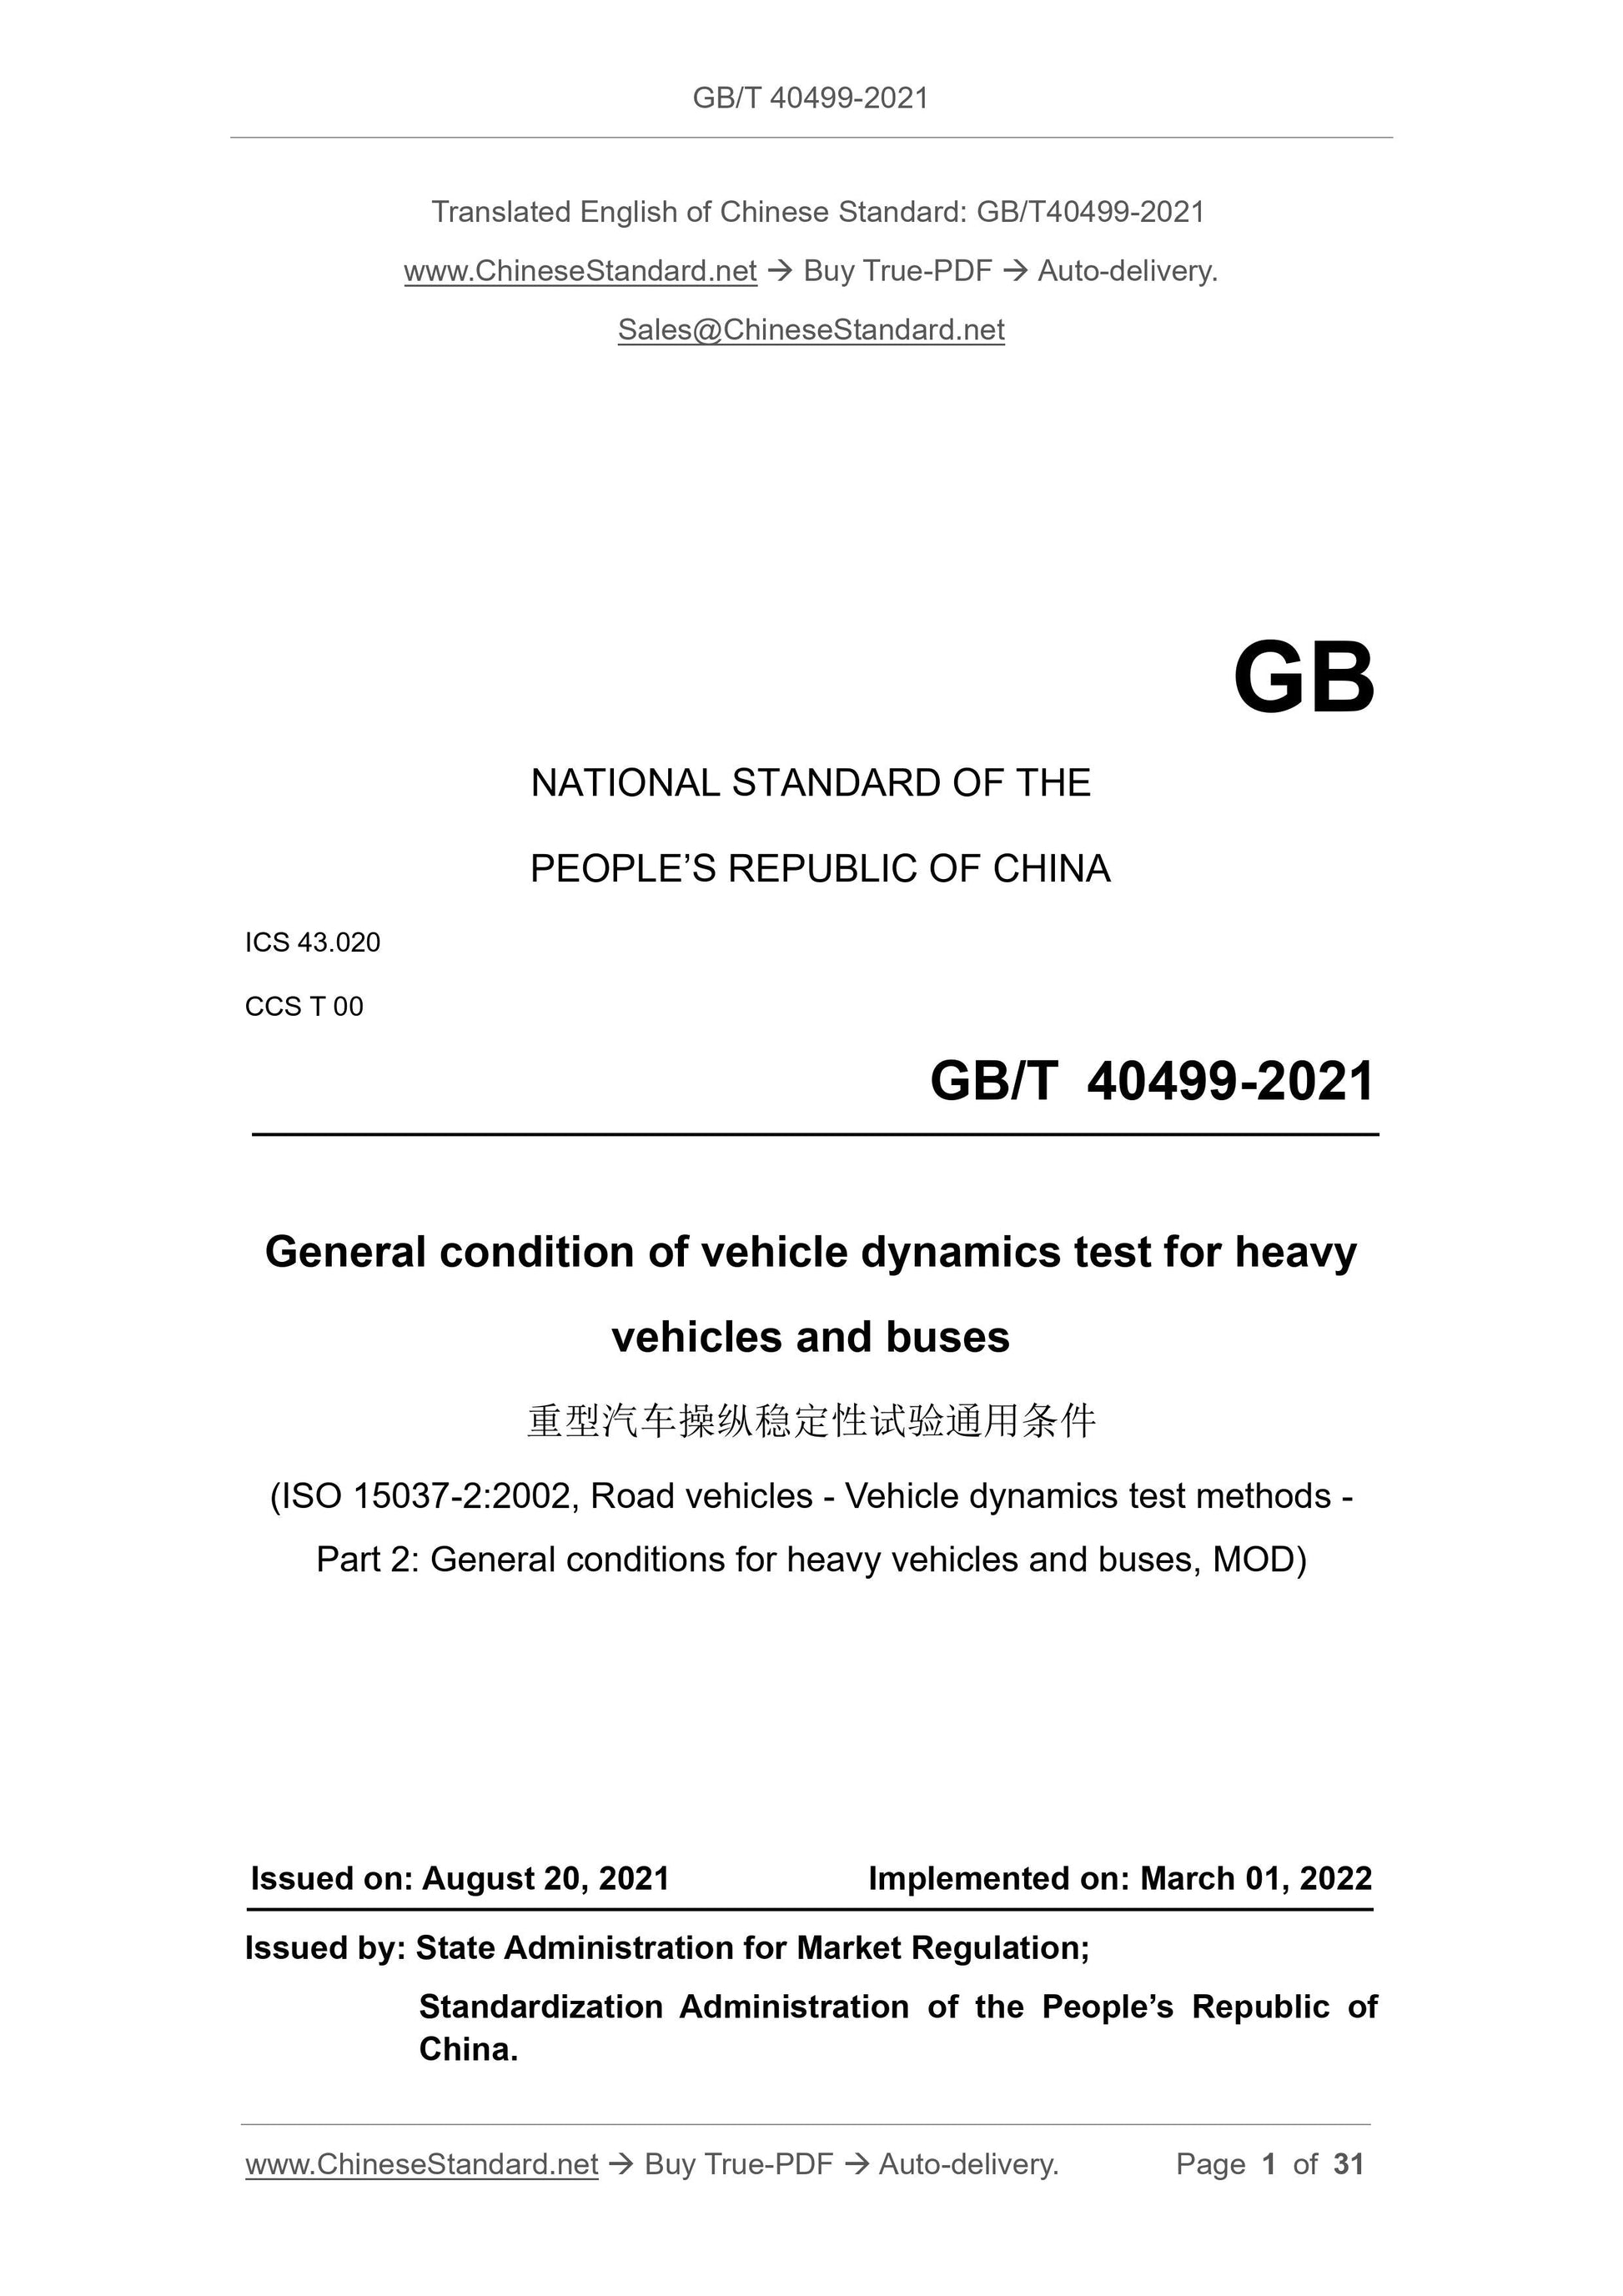 GB/T 40499-2021 Page 1